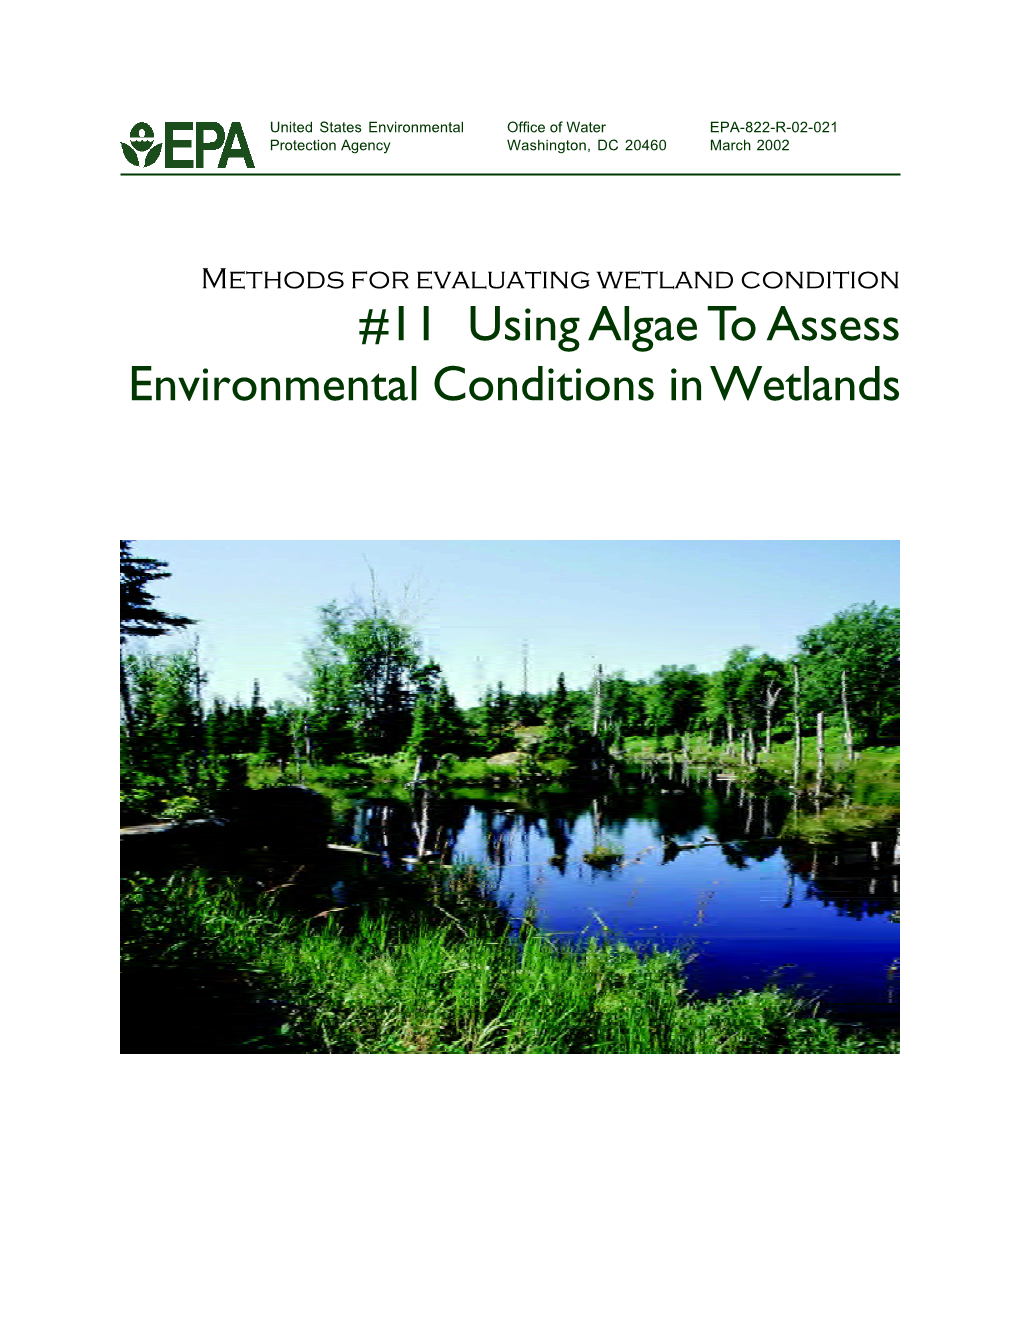 Using Algae to Assess Environmental Conditions in Wetlands